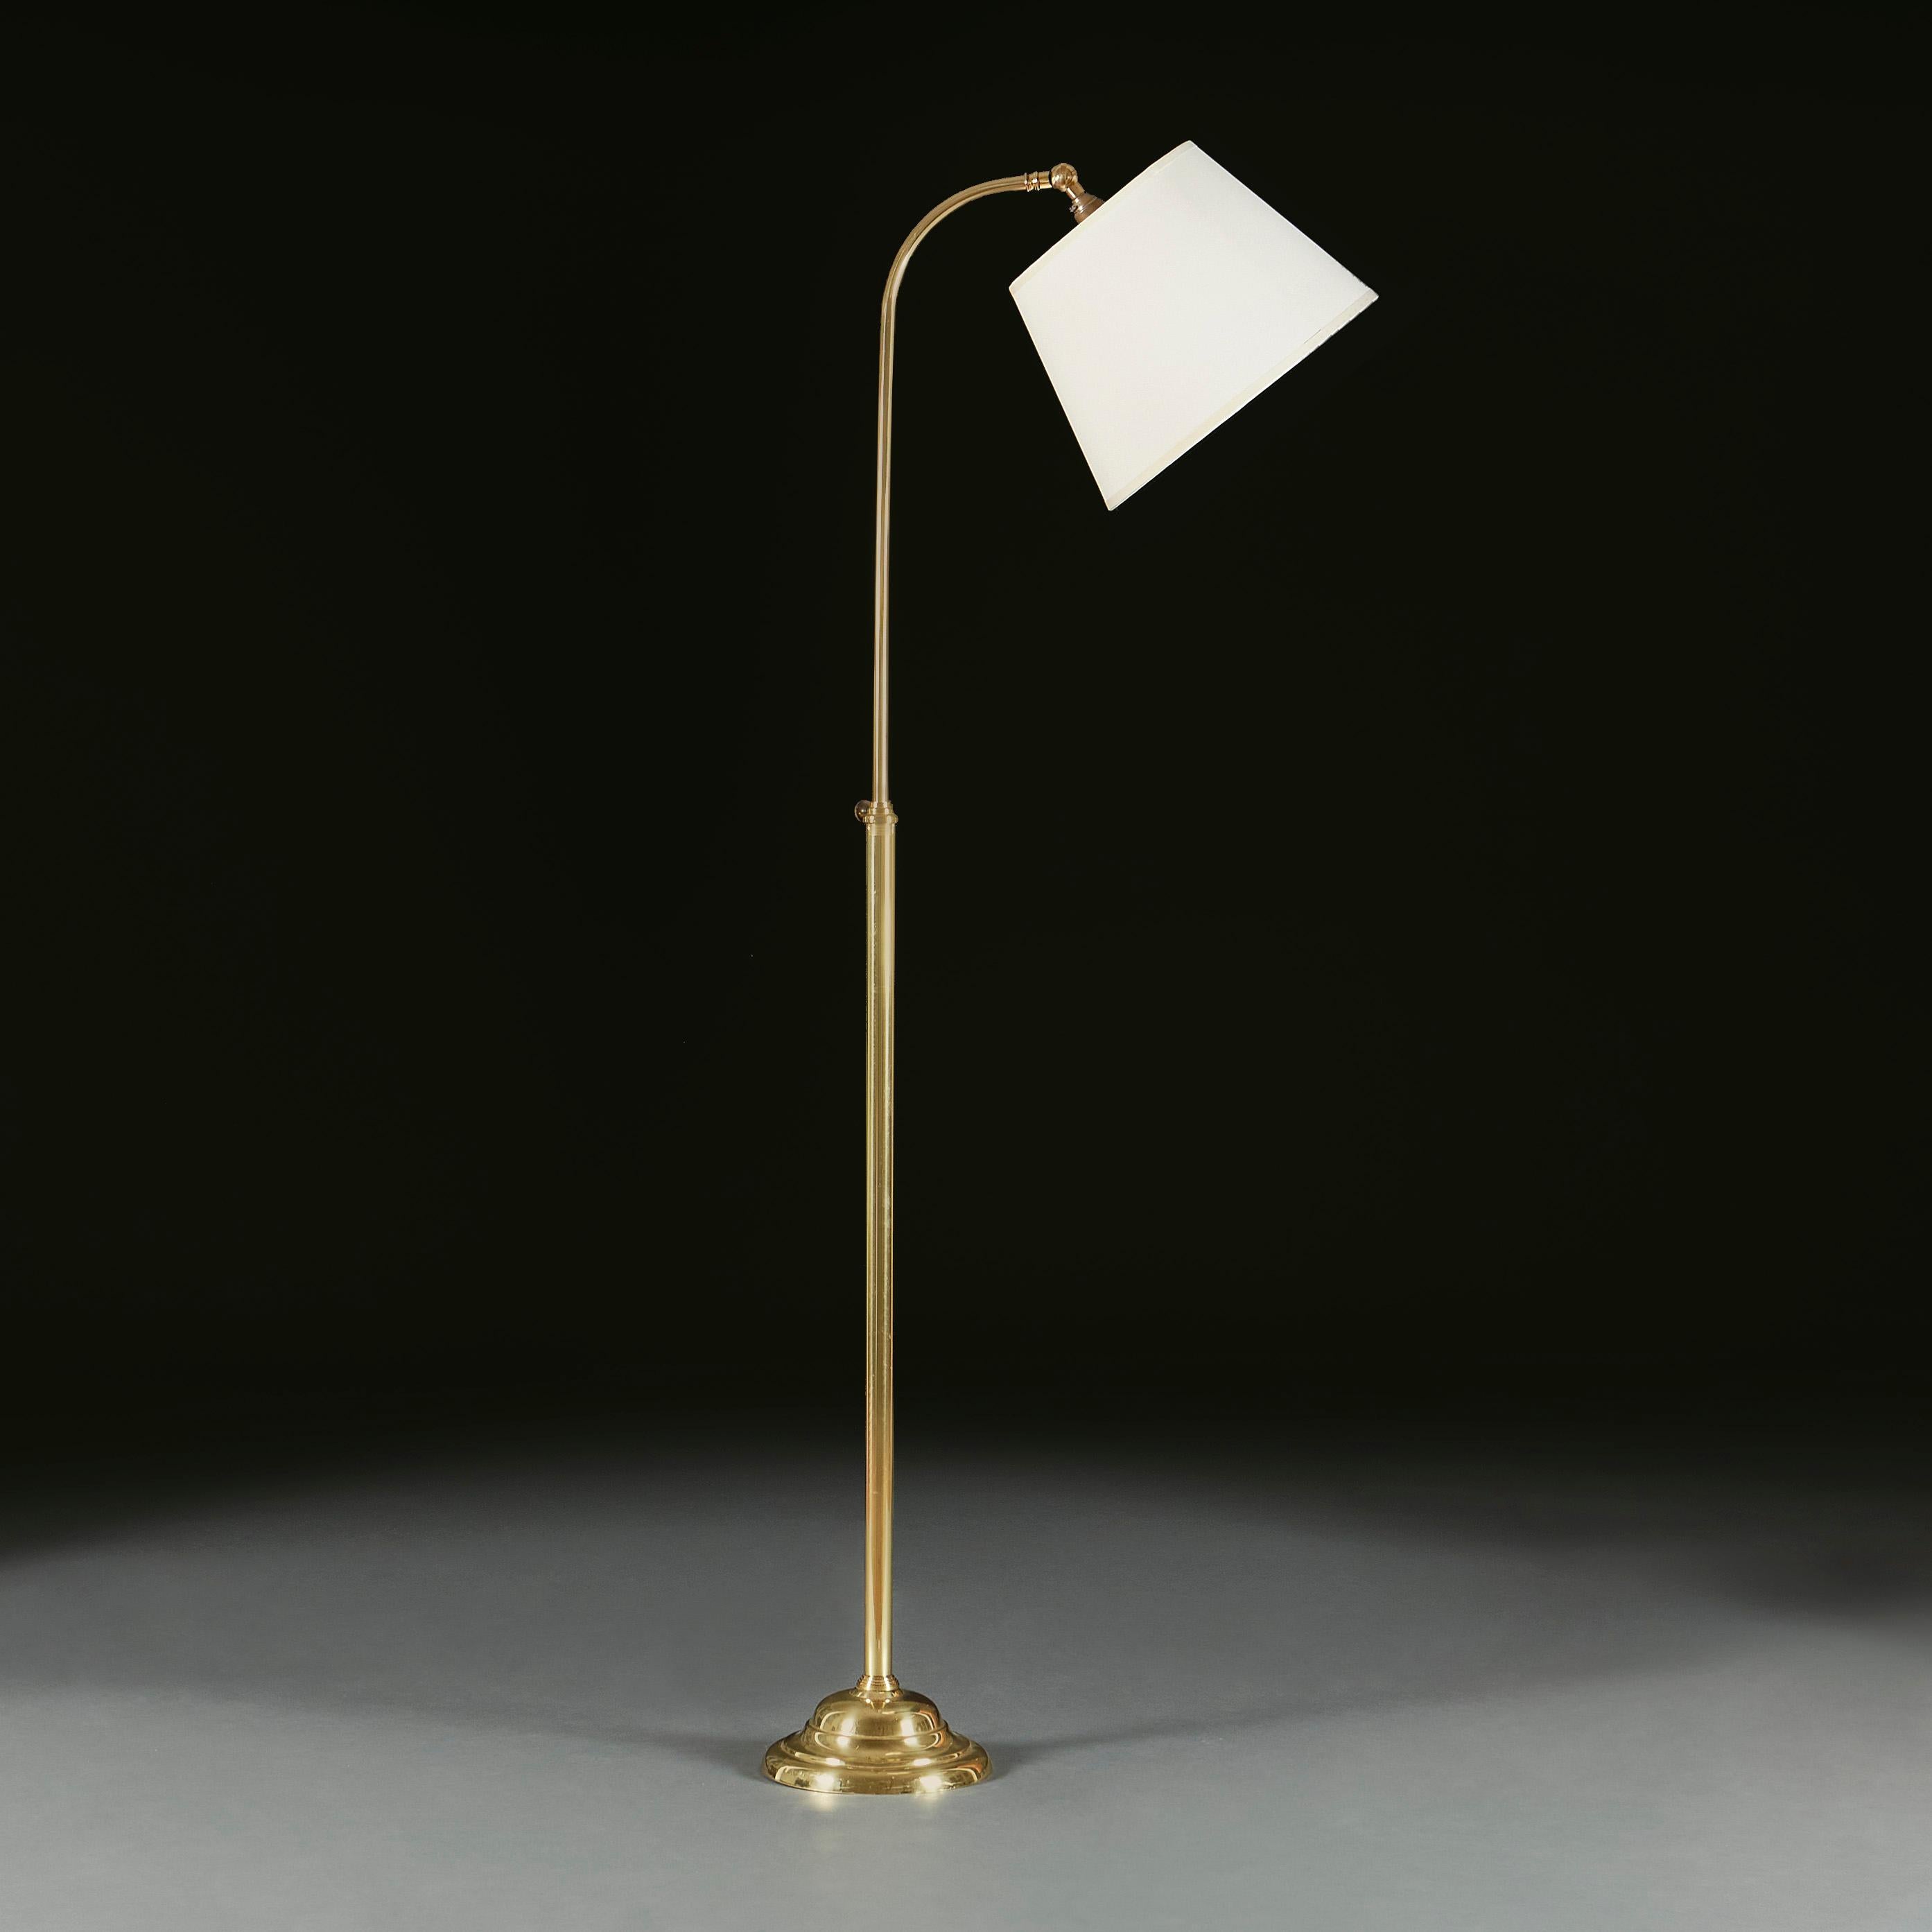 England, circa 1910.

An Edwardian brass standard lamp with telescopic adjustable stem and curved arm, all supported on a circular base.

Measures : Total height 148.00cm
Diameter of base 21.00cm.

Please note: This is currently wired for the